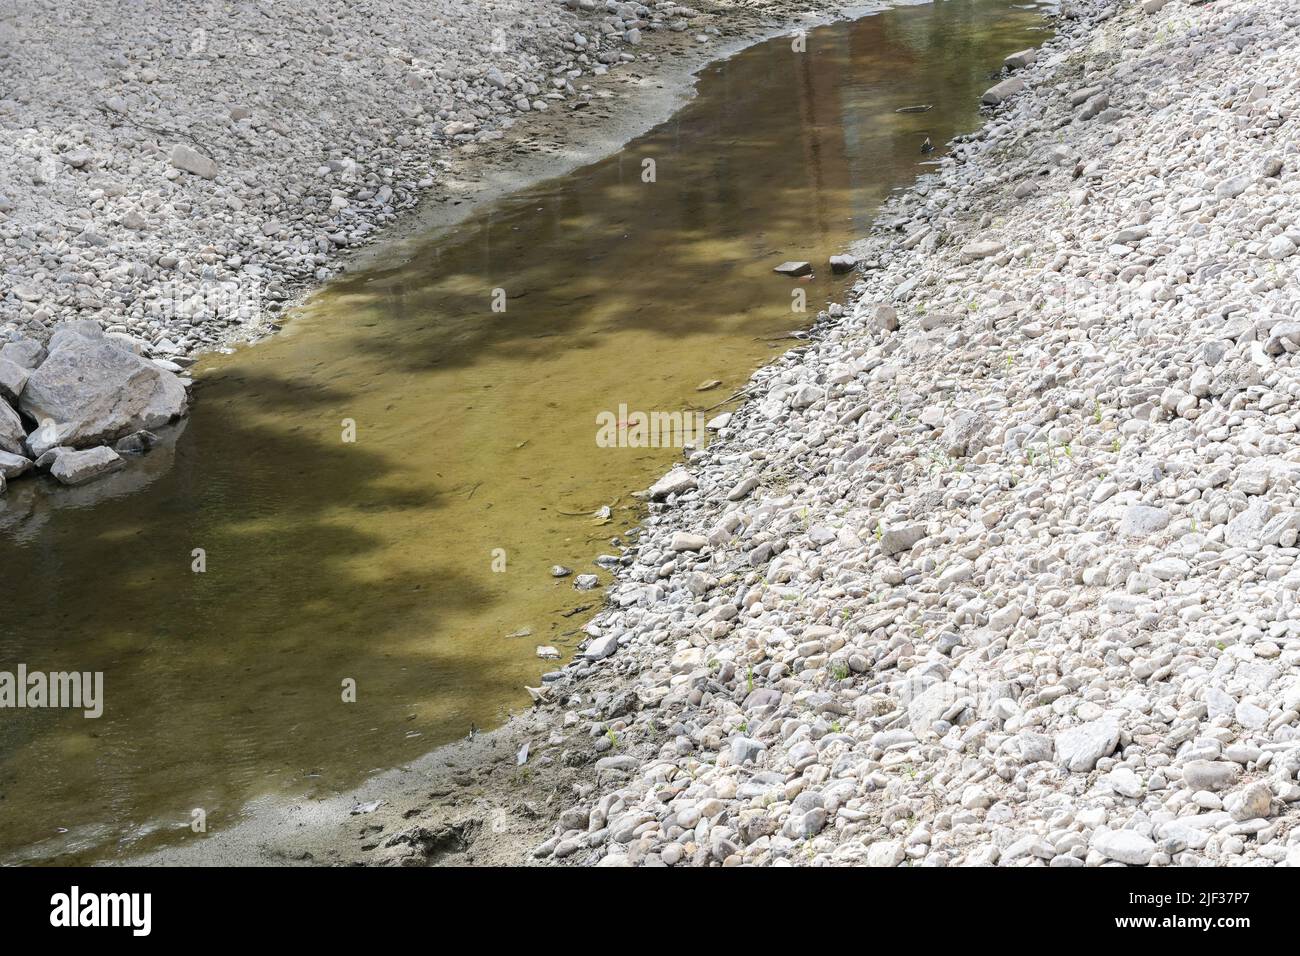 Almost dried up river bed after a longer heat period, effect of global climate change, ecology concept, copy space, selected focus Stock Photo